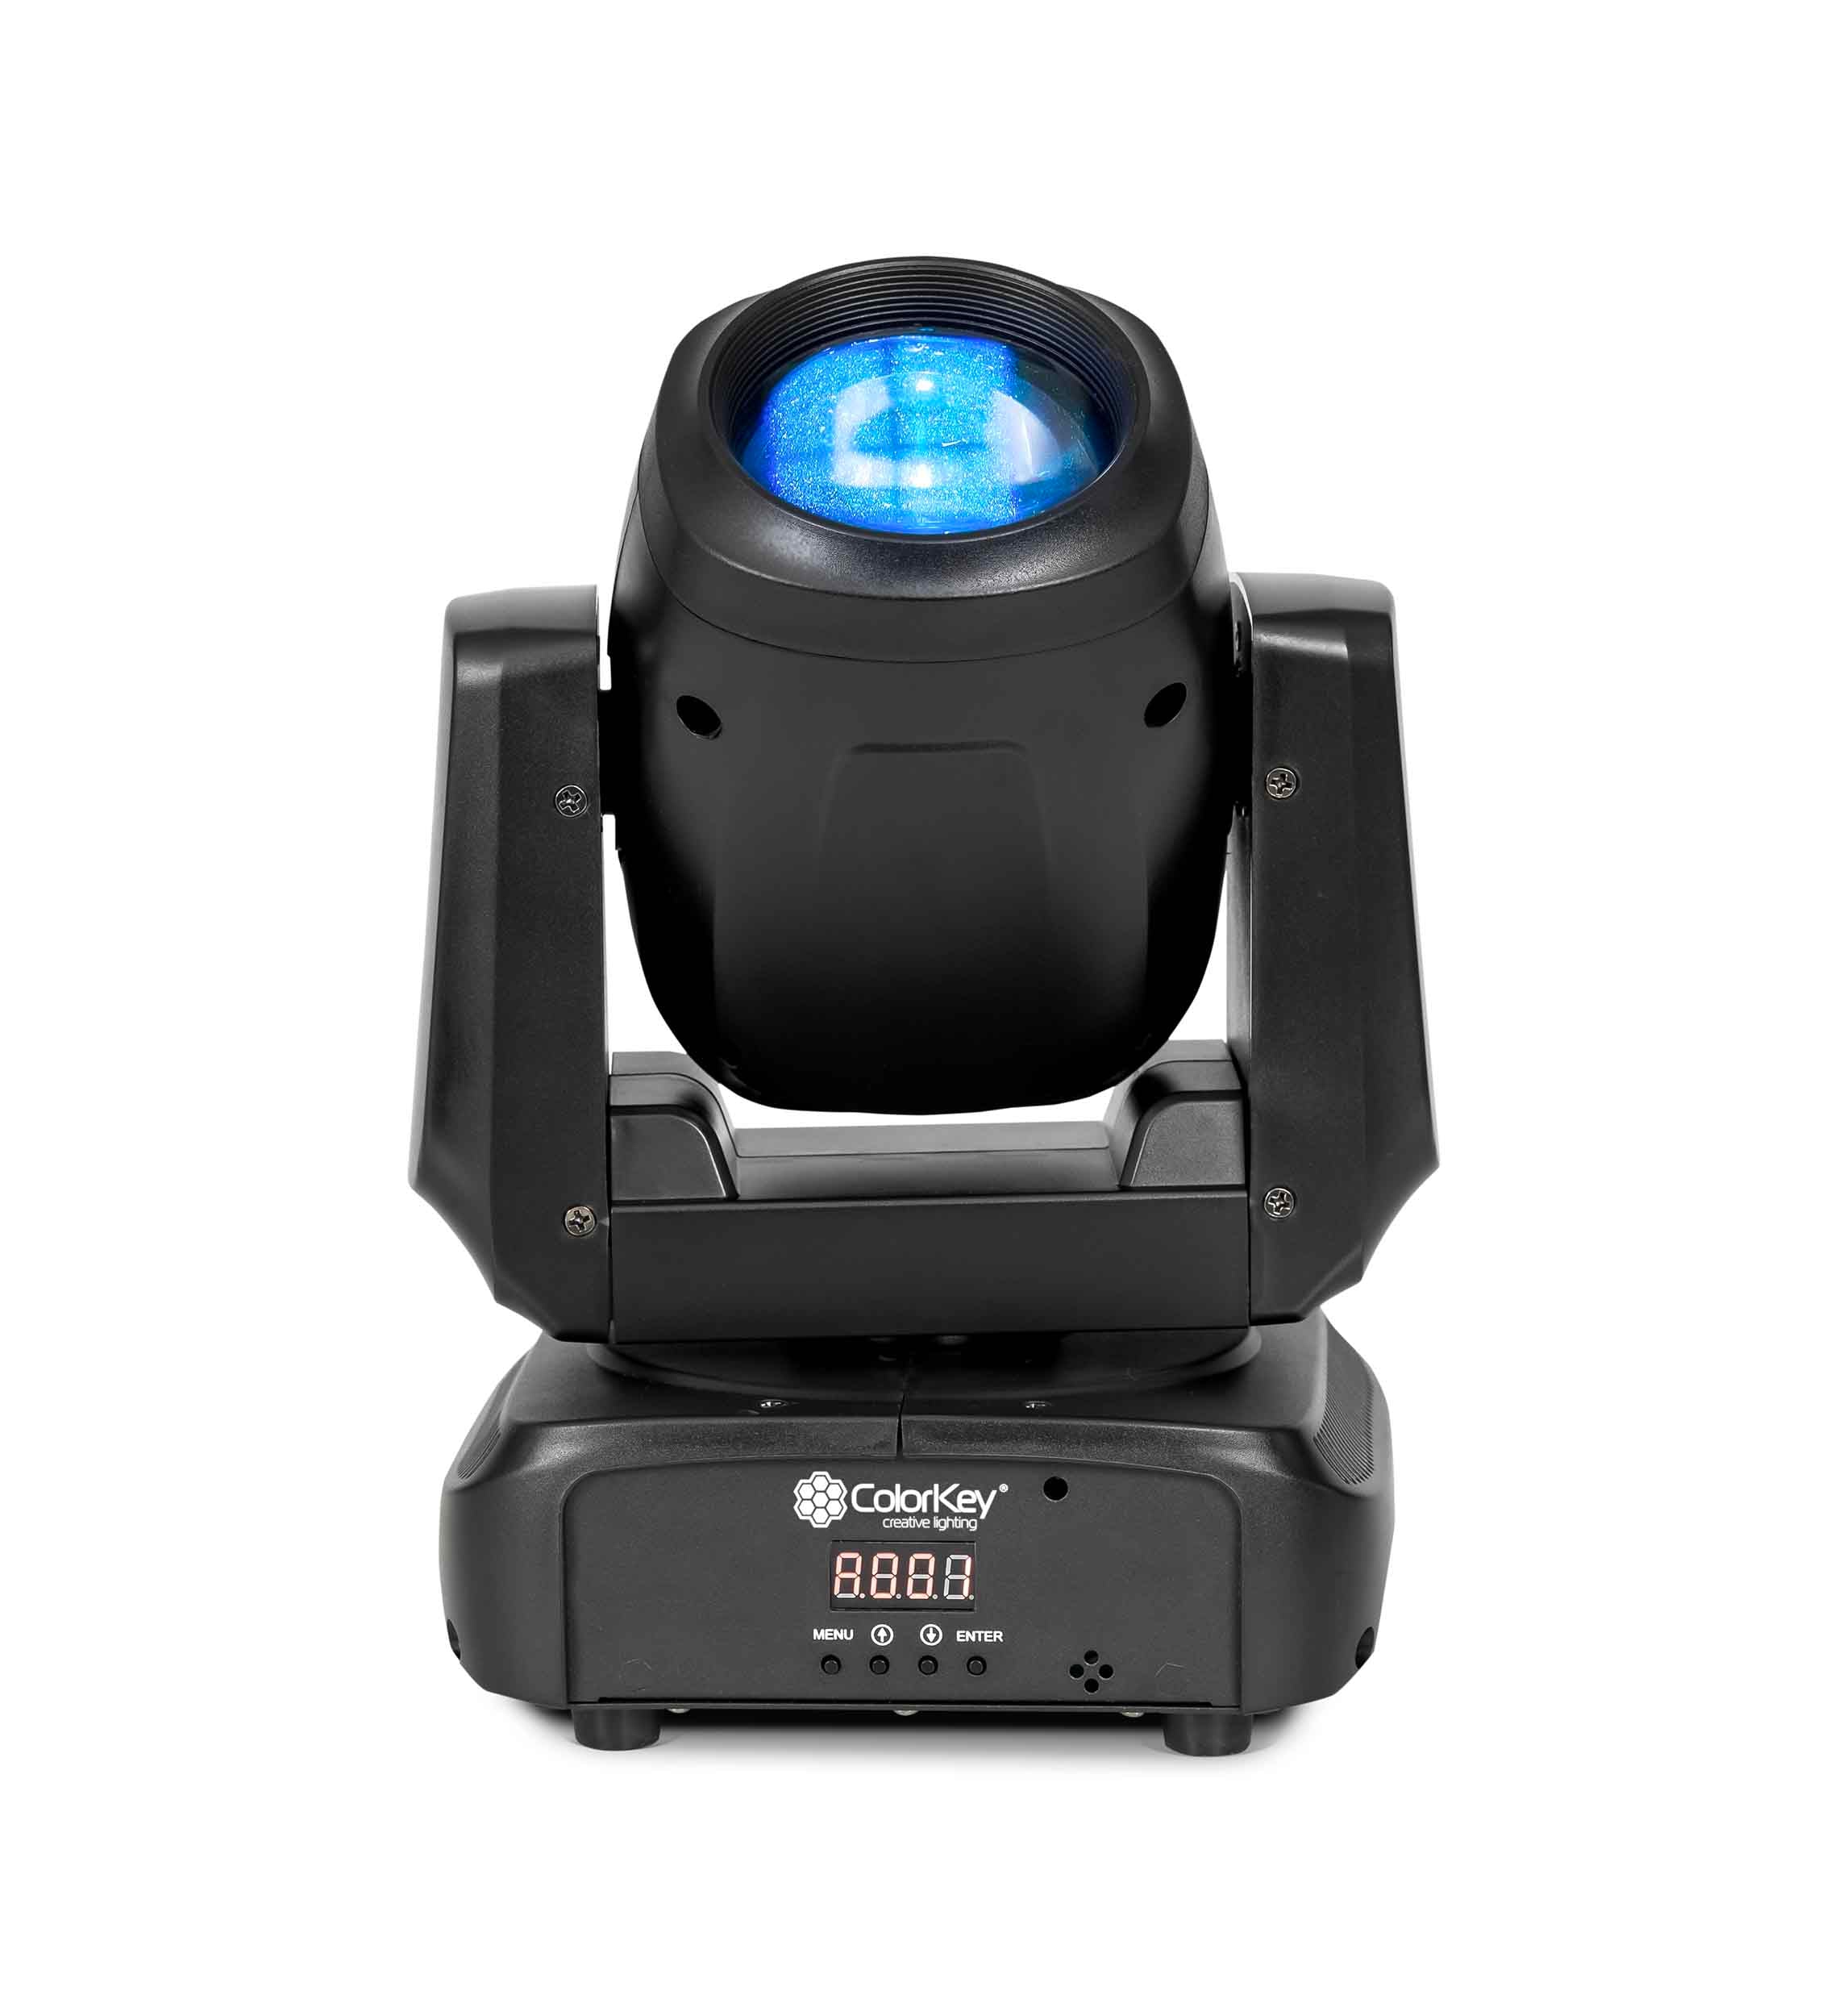 Colorkey CKU-5060, Compact 100-Watt Moving Head Beam with Rainbow Prism by ColorKey